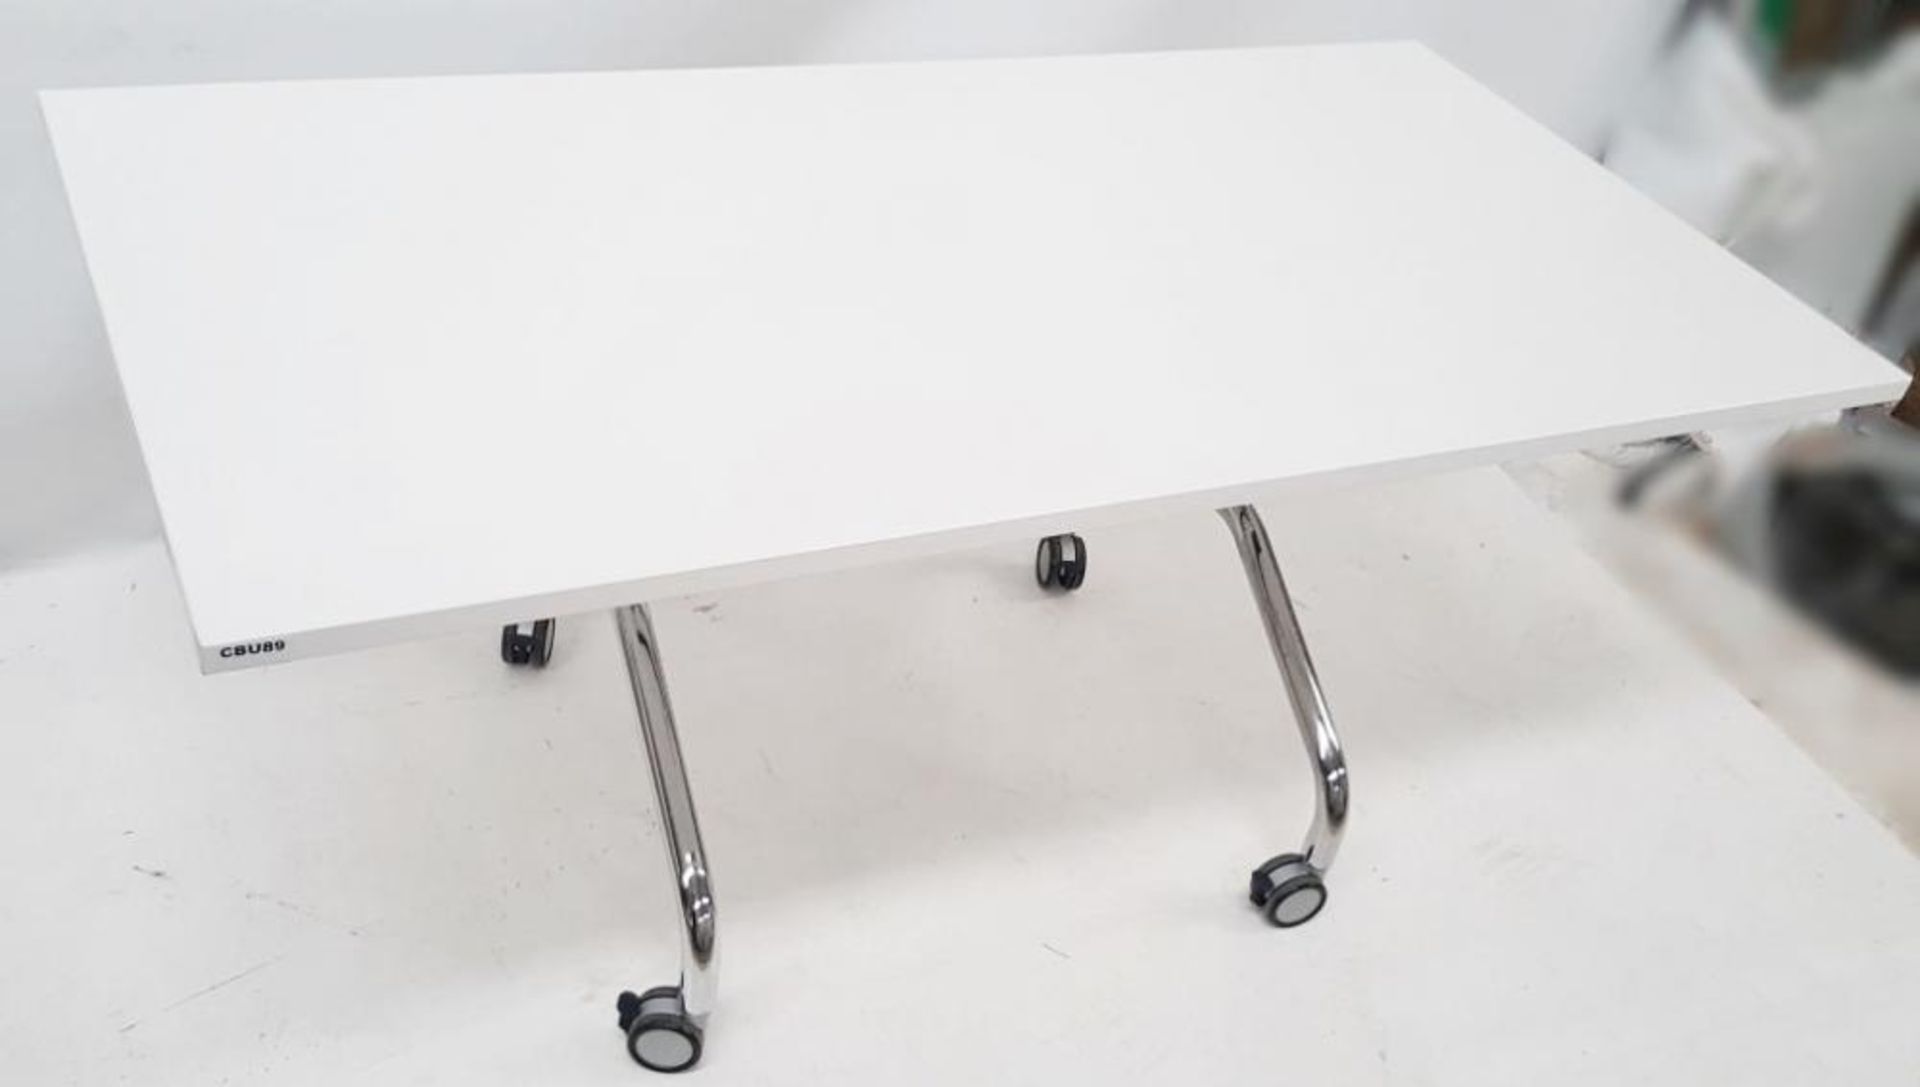 1 x Large Premium Office Table With Folding Top - Colour: Brilliant White With Chrome Legs - Dimensi - Image 4 of 4